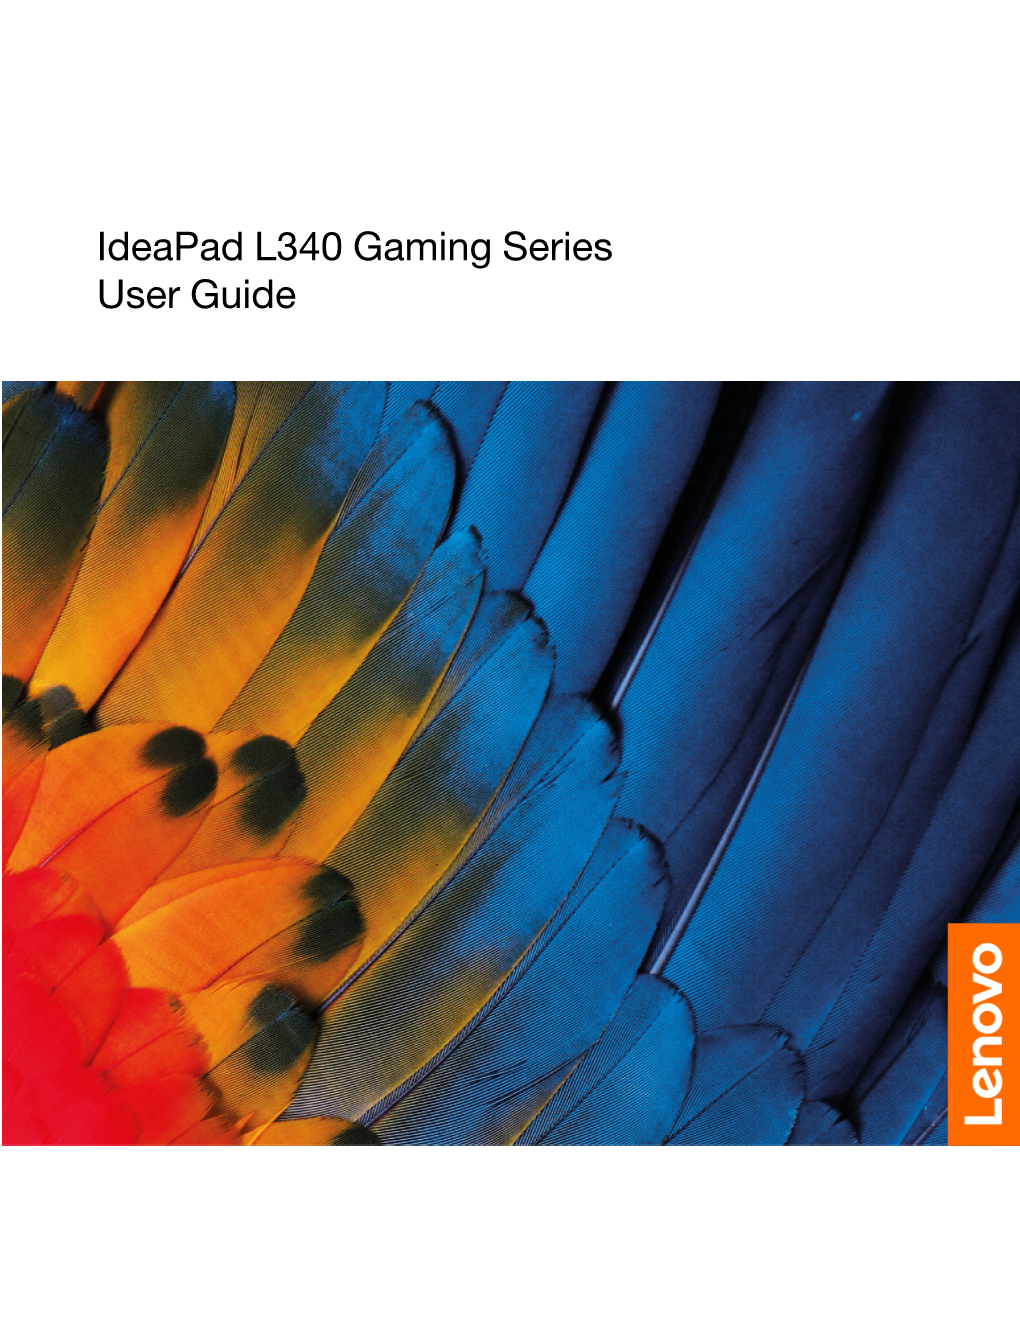 Ideapad L340 Gaming Series User Guide Read This First